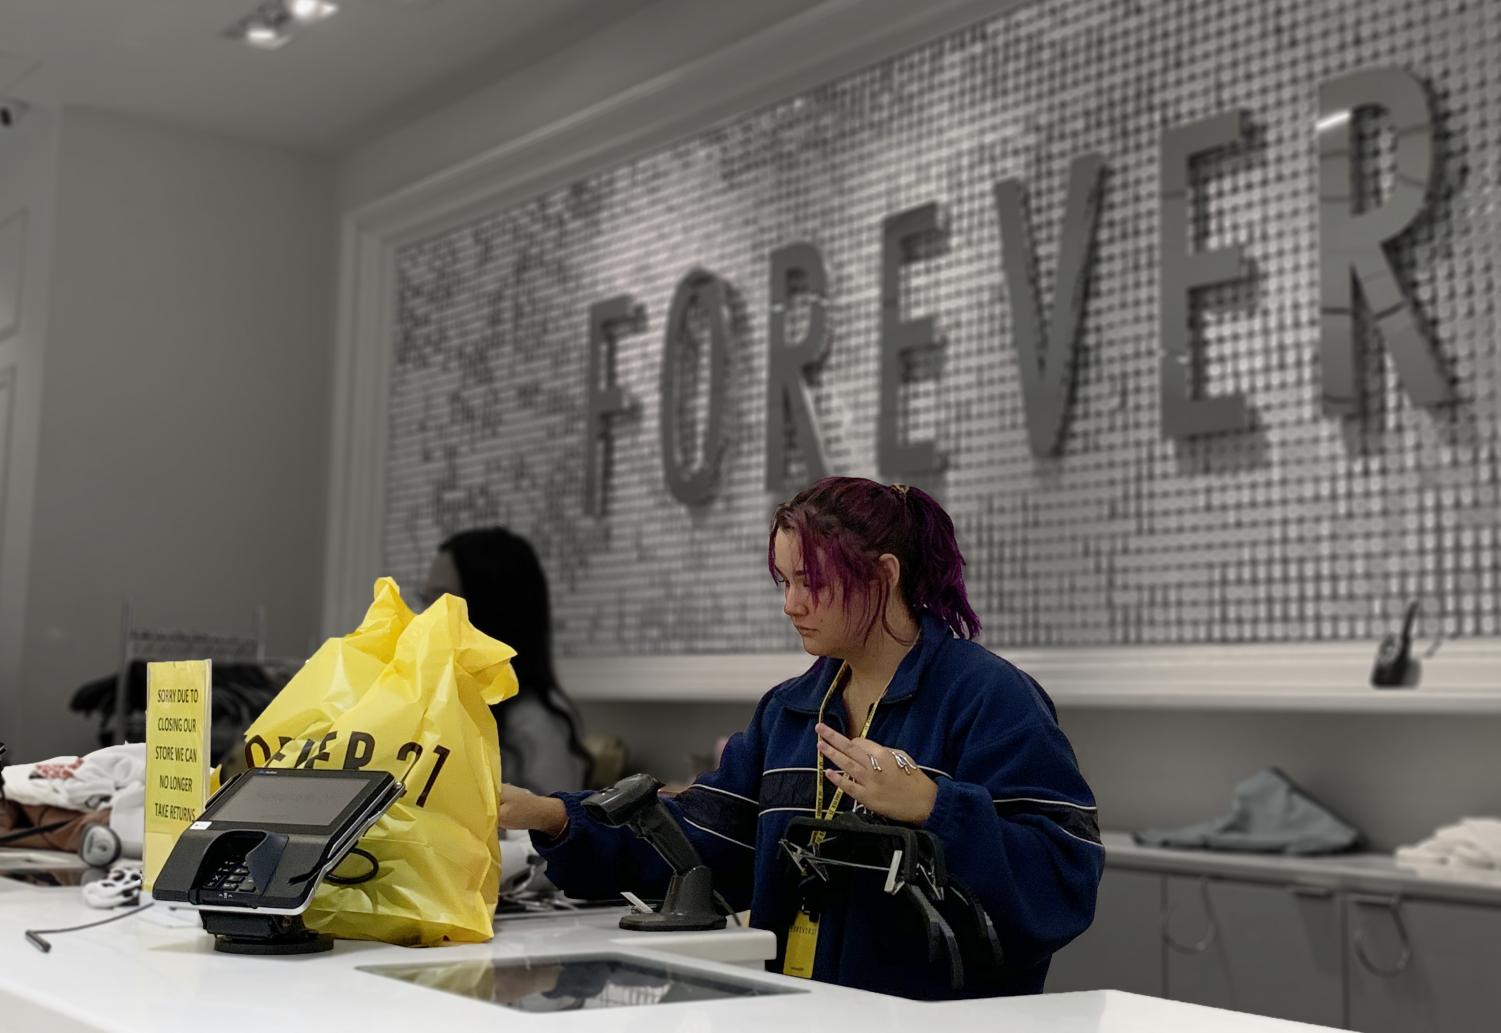 Forever 21 Strapped for Cash as Rent Bills Loom – WWD